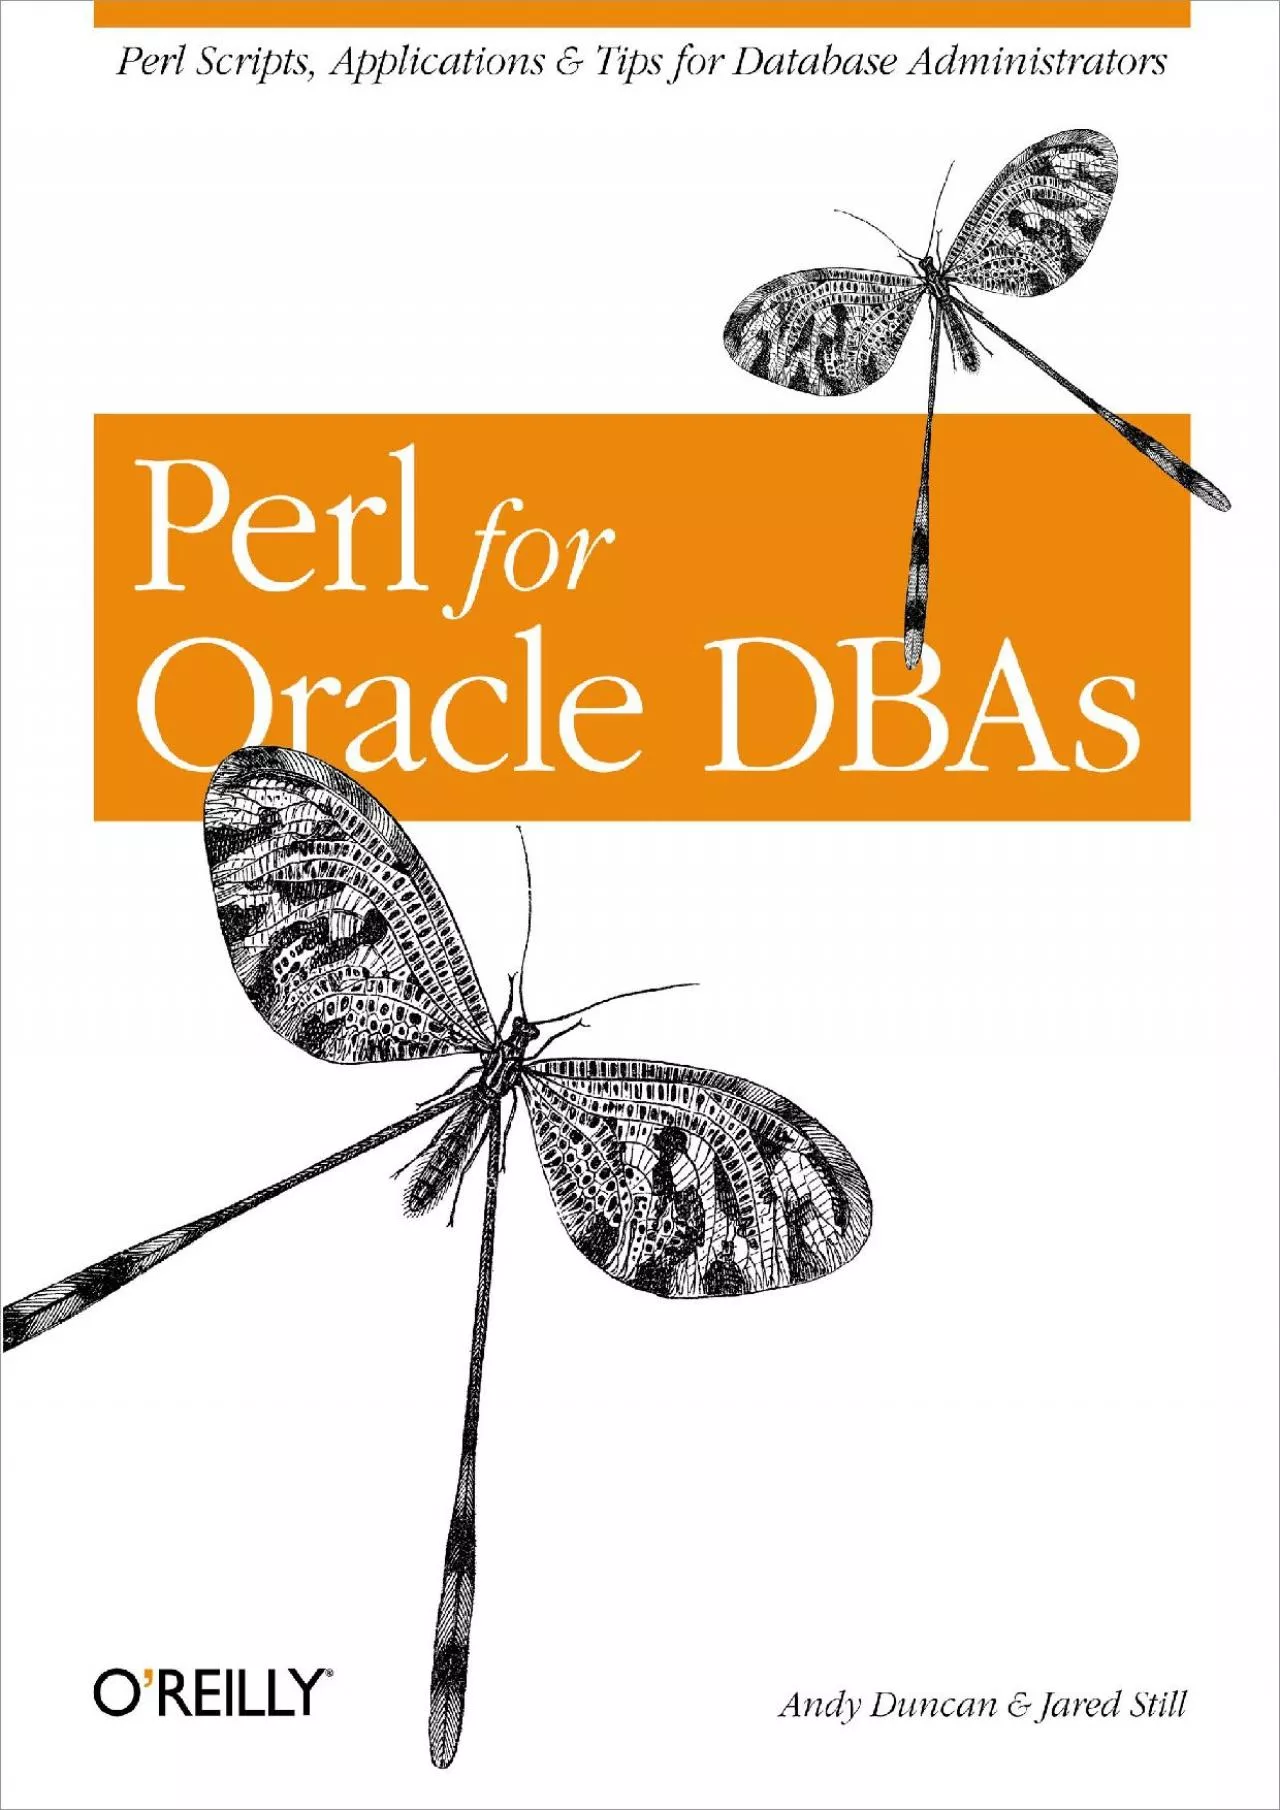 [FREE]-Perl for Oracle DBAs Perl Scripts, Applications & Tips for Database Administrators